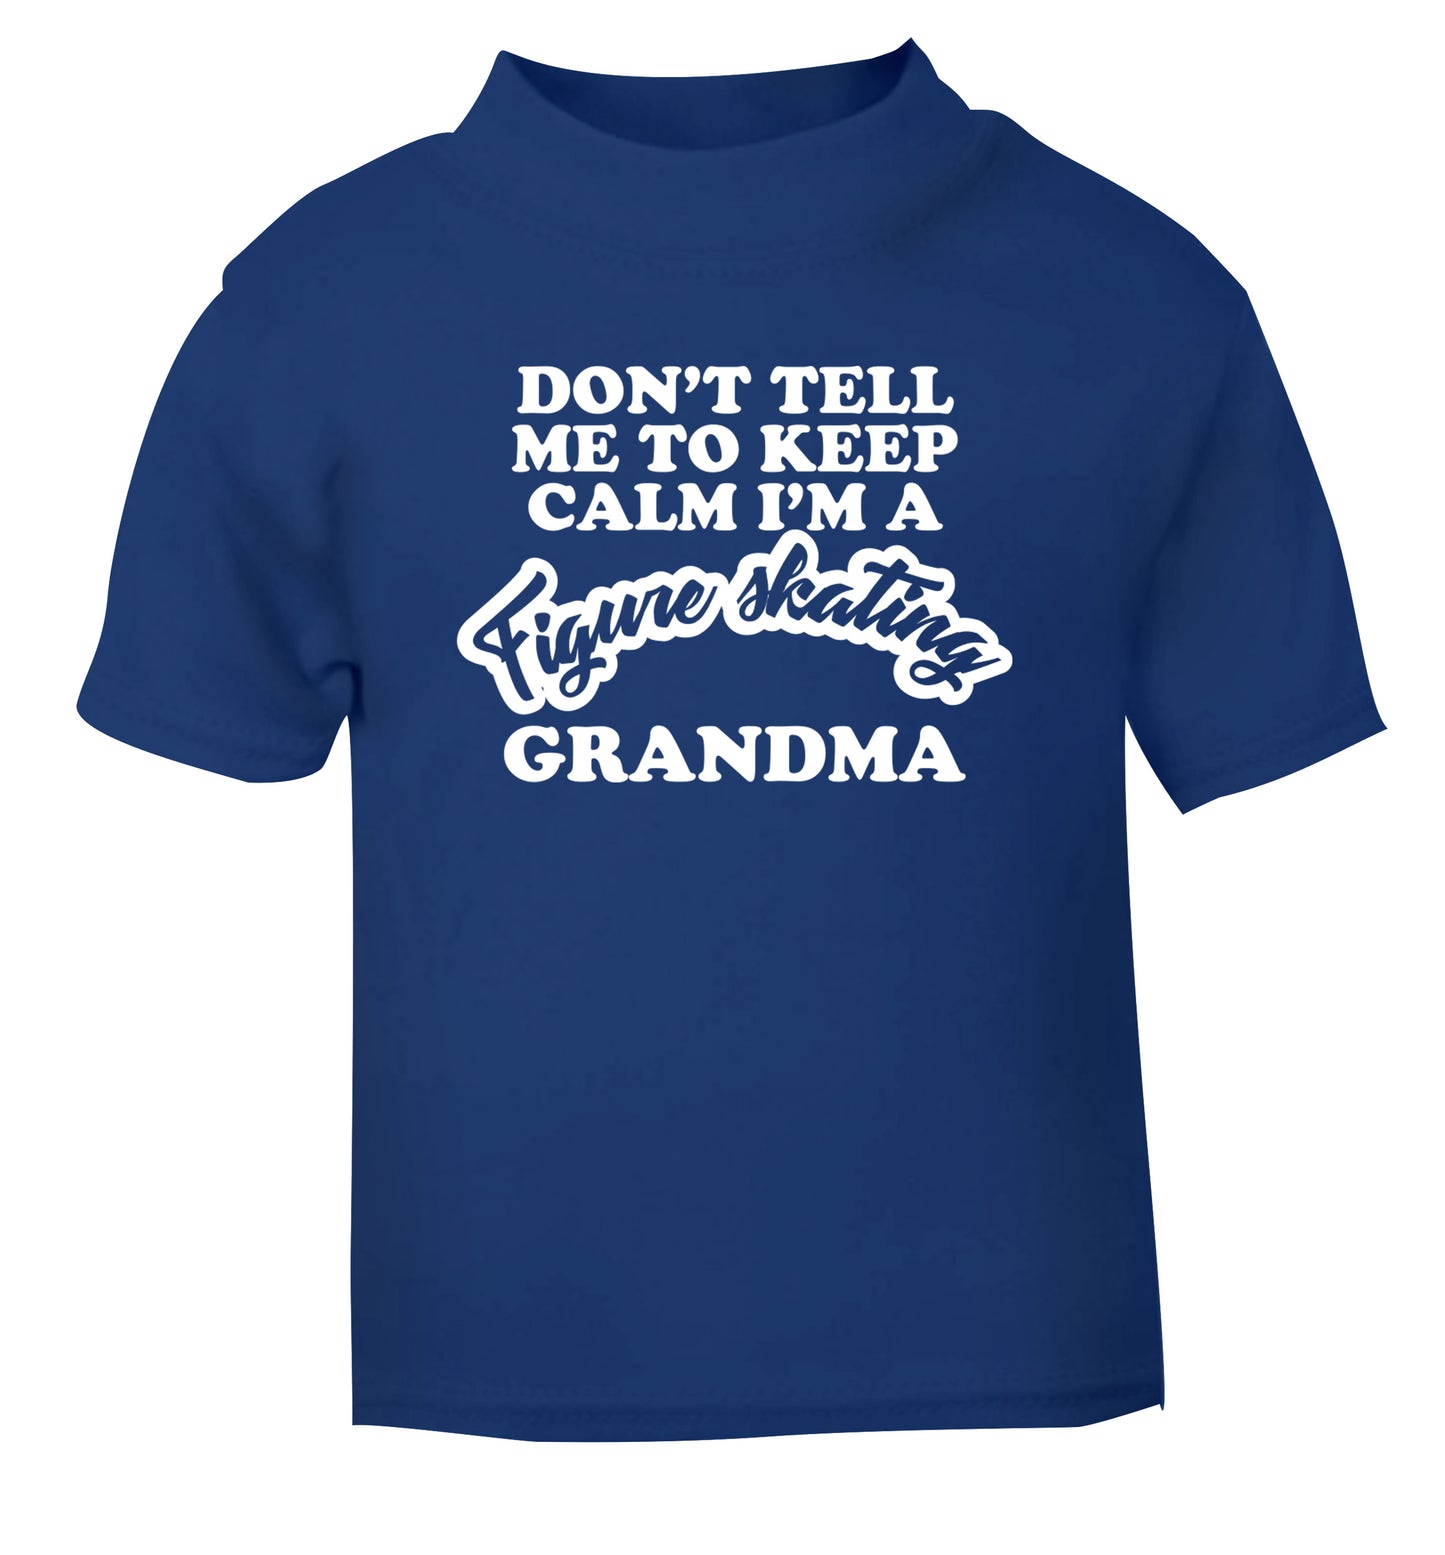 Don't tell me to keep calm I'm a figure skating grandma blue Baby Toddler Tshirt 2 Years